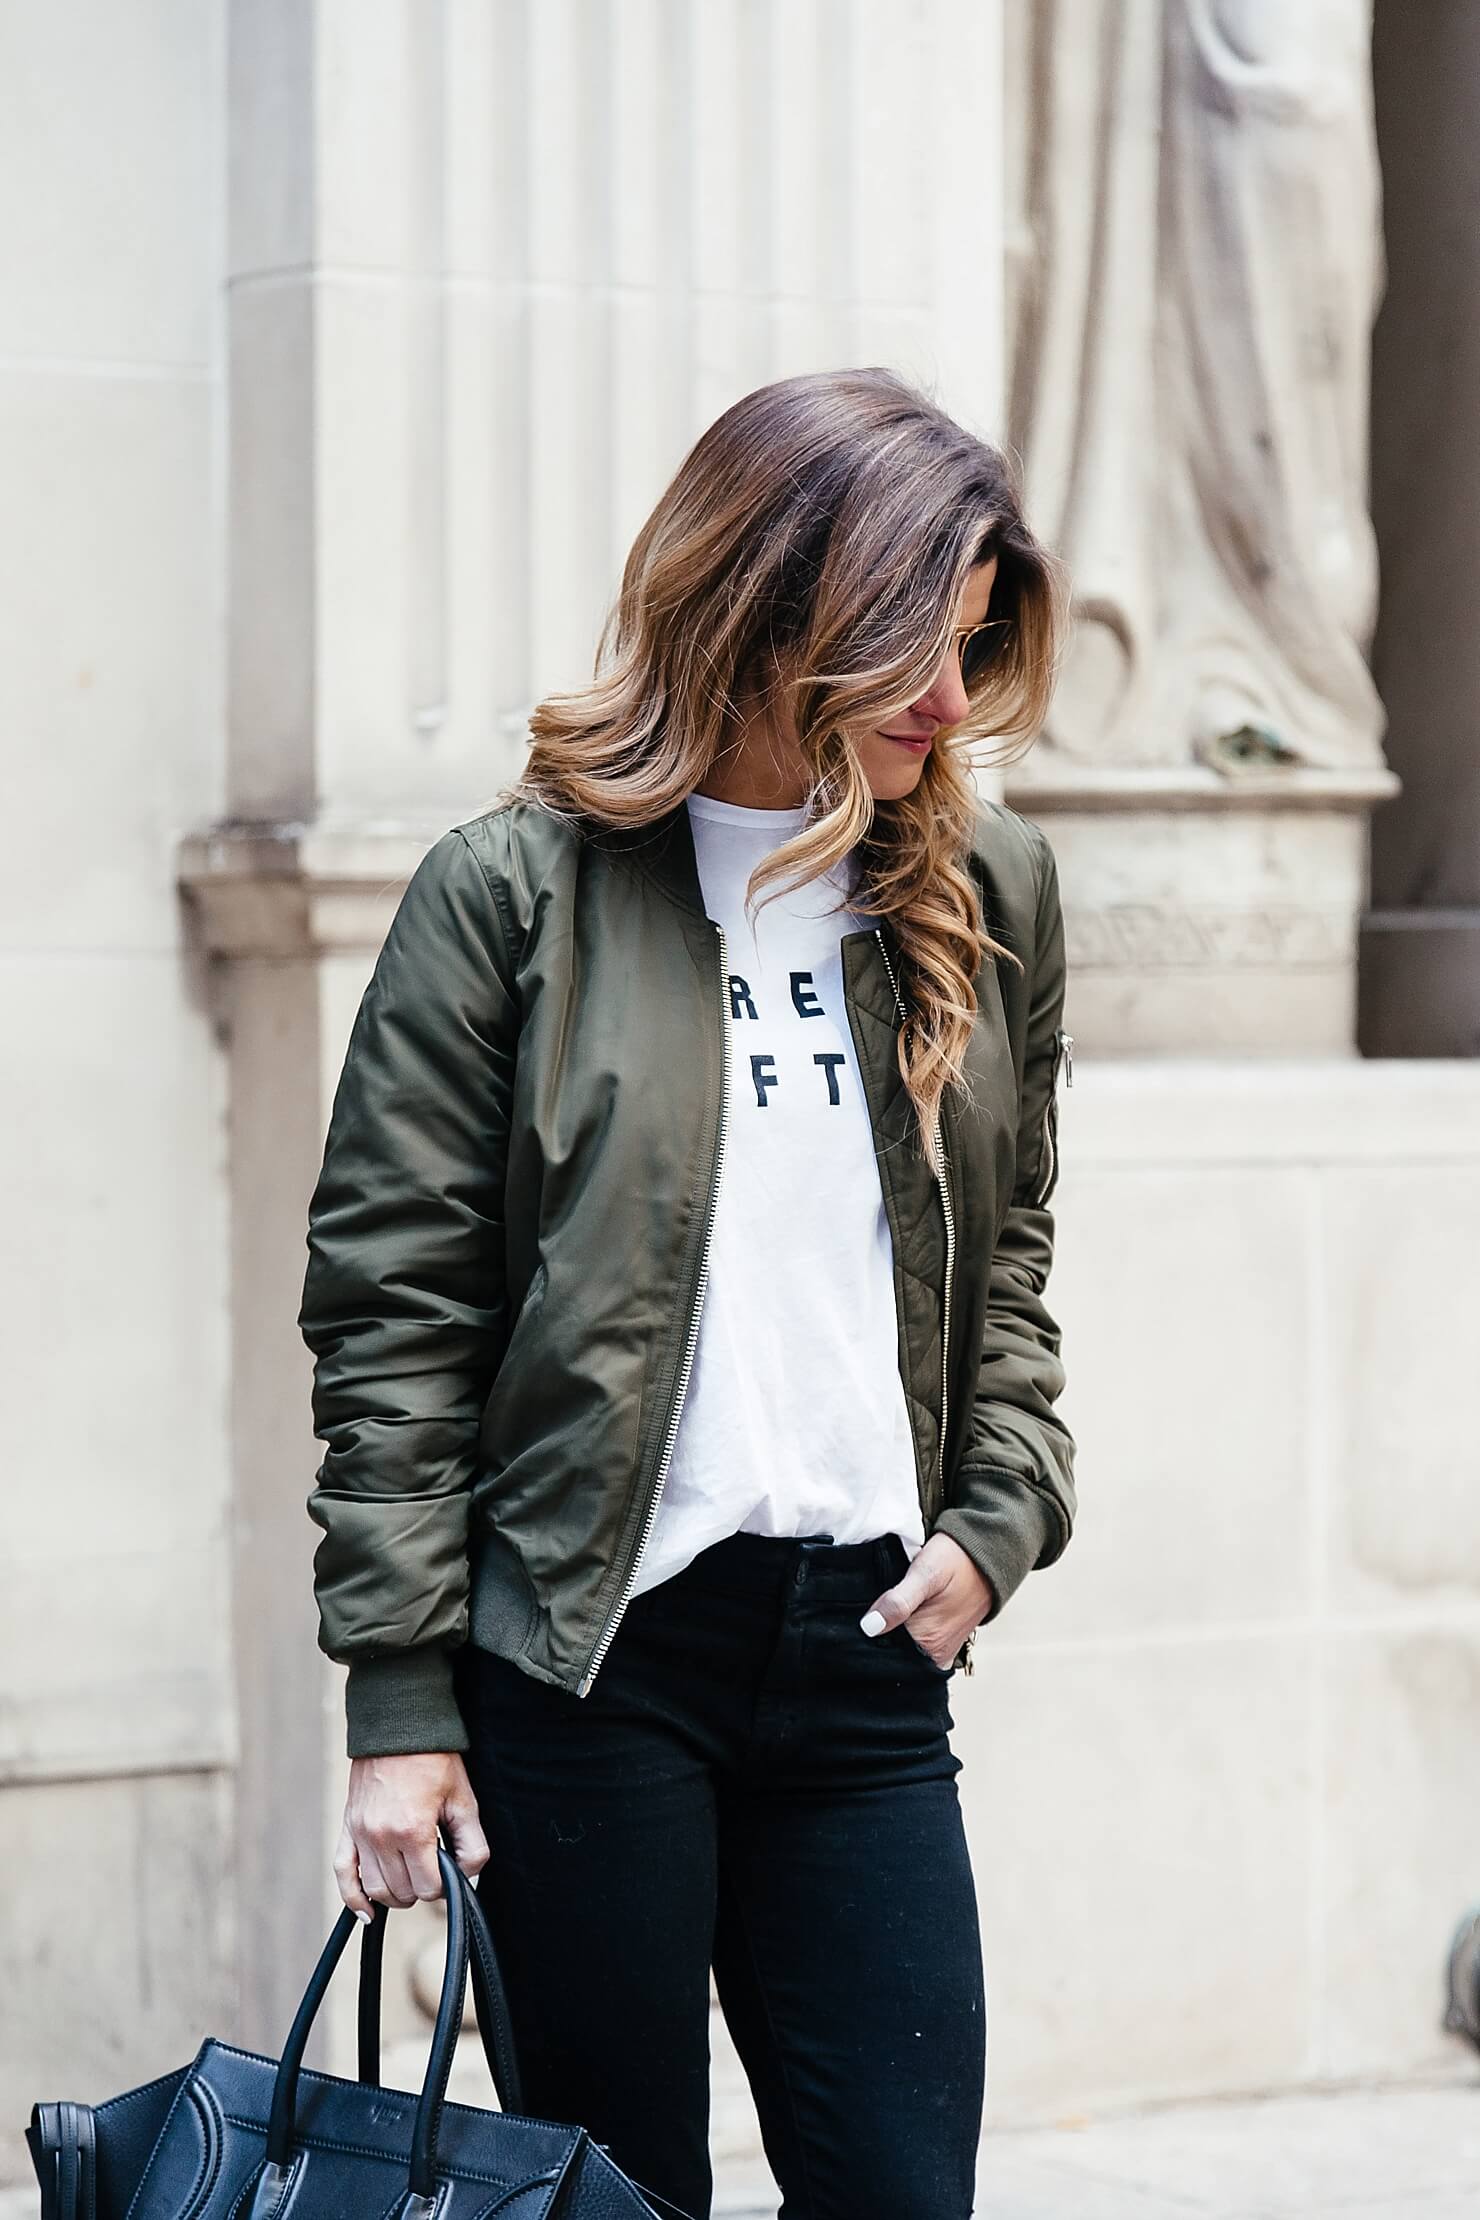 white sincerely jules tee, olive green topshop bomber jacket, celine phantom tote, ray ban aviators, dressing up a tee shirt outfit